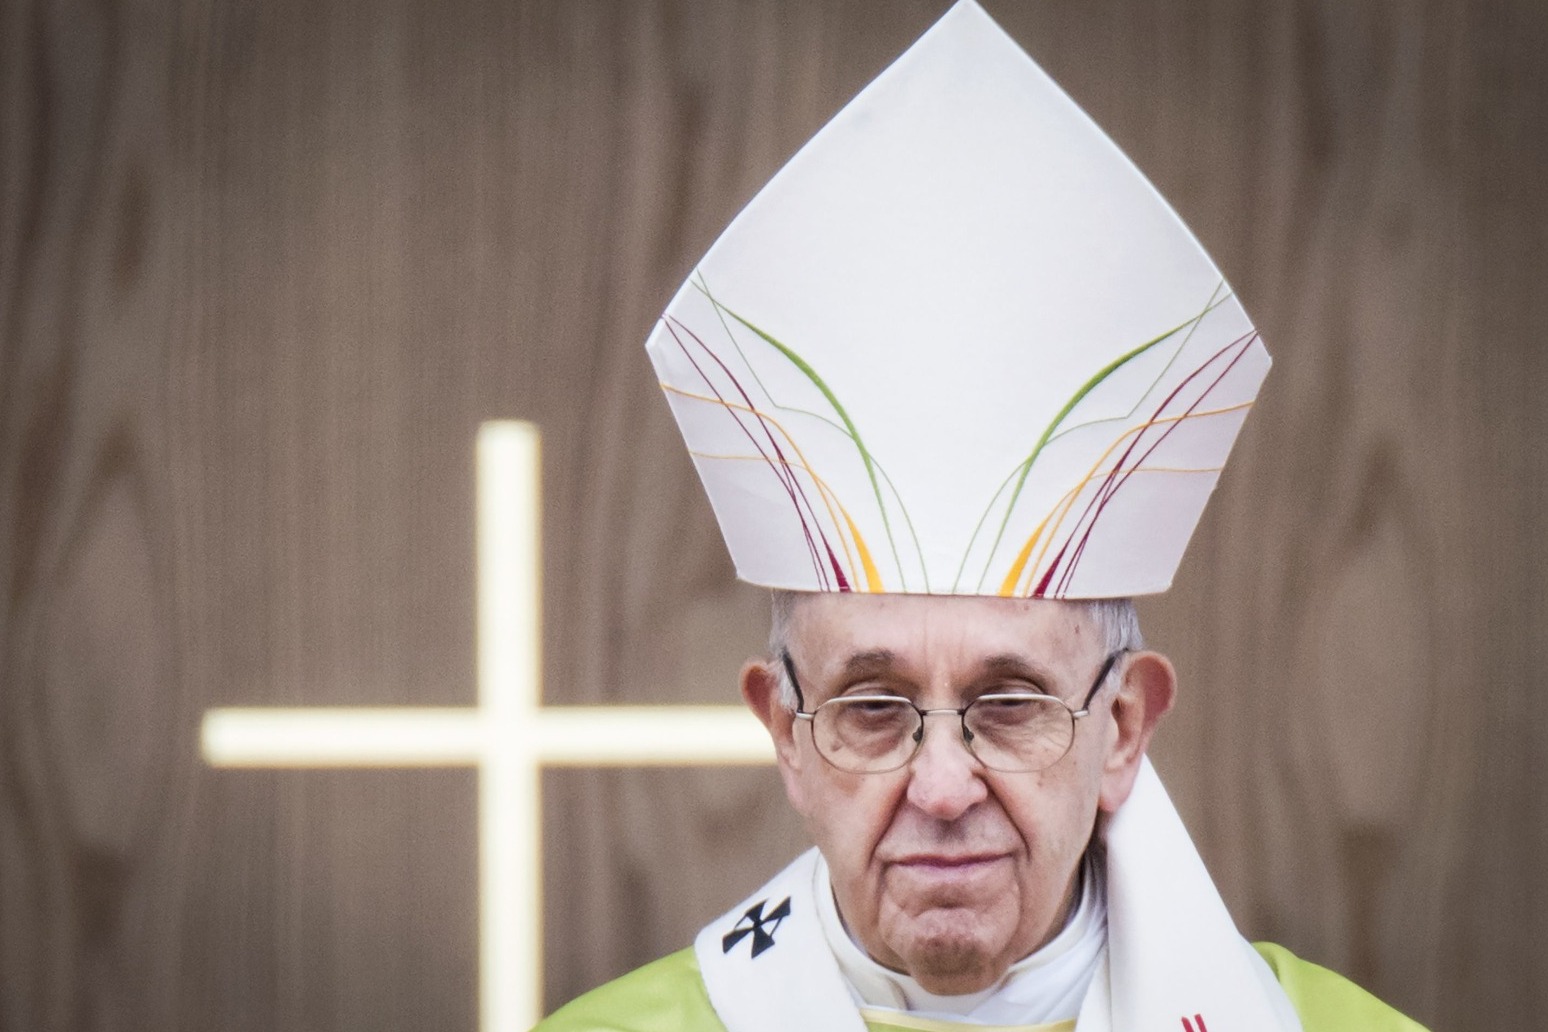 Pope Francis leads Palm Sunday Mass after hospital stay 